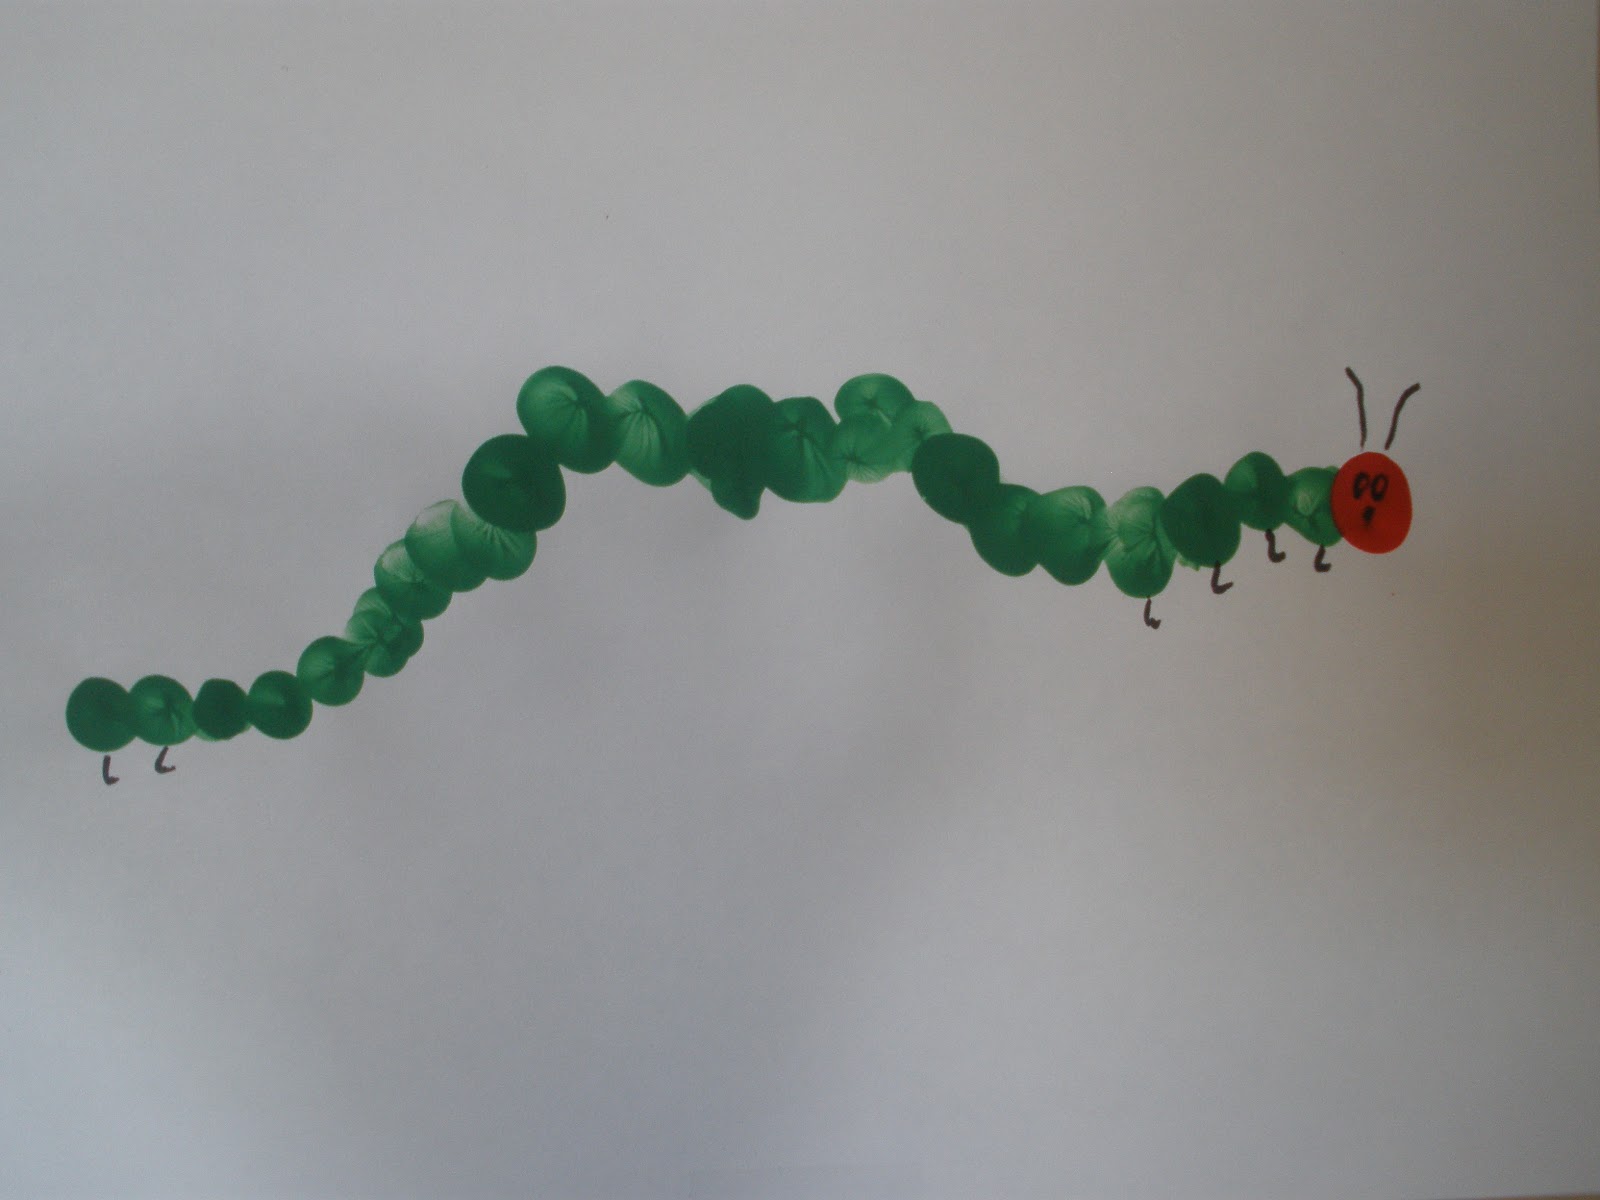 I Used To Have A Brain: The Very Hungry Caterpillar